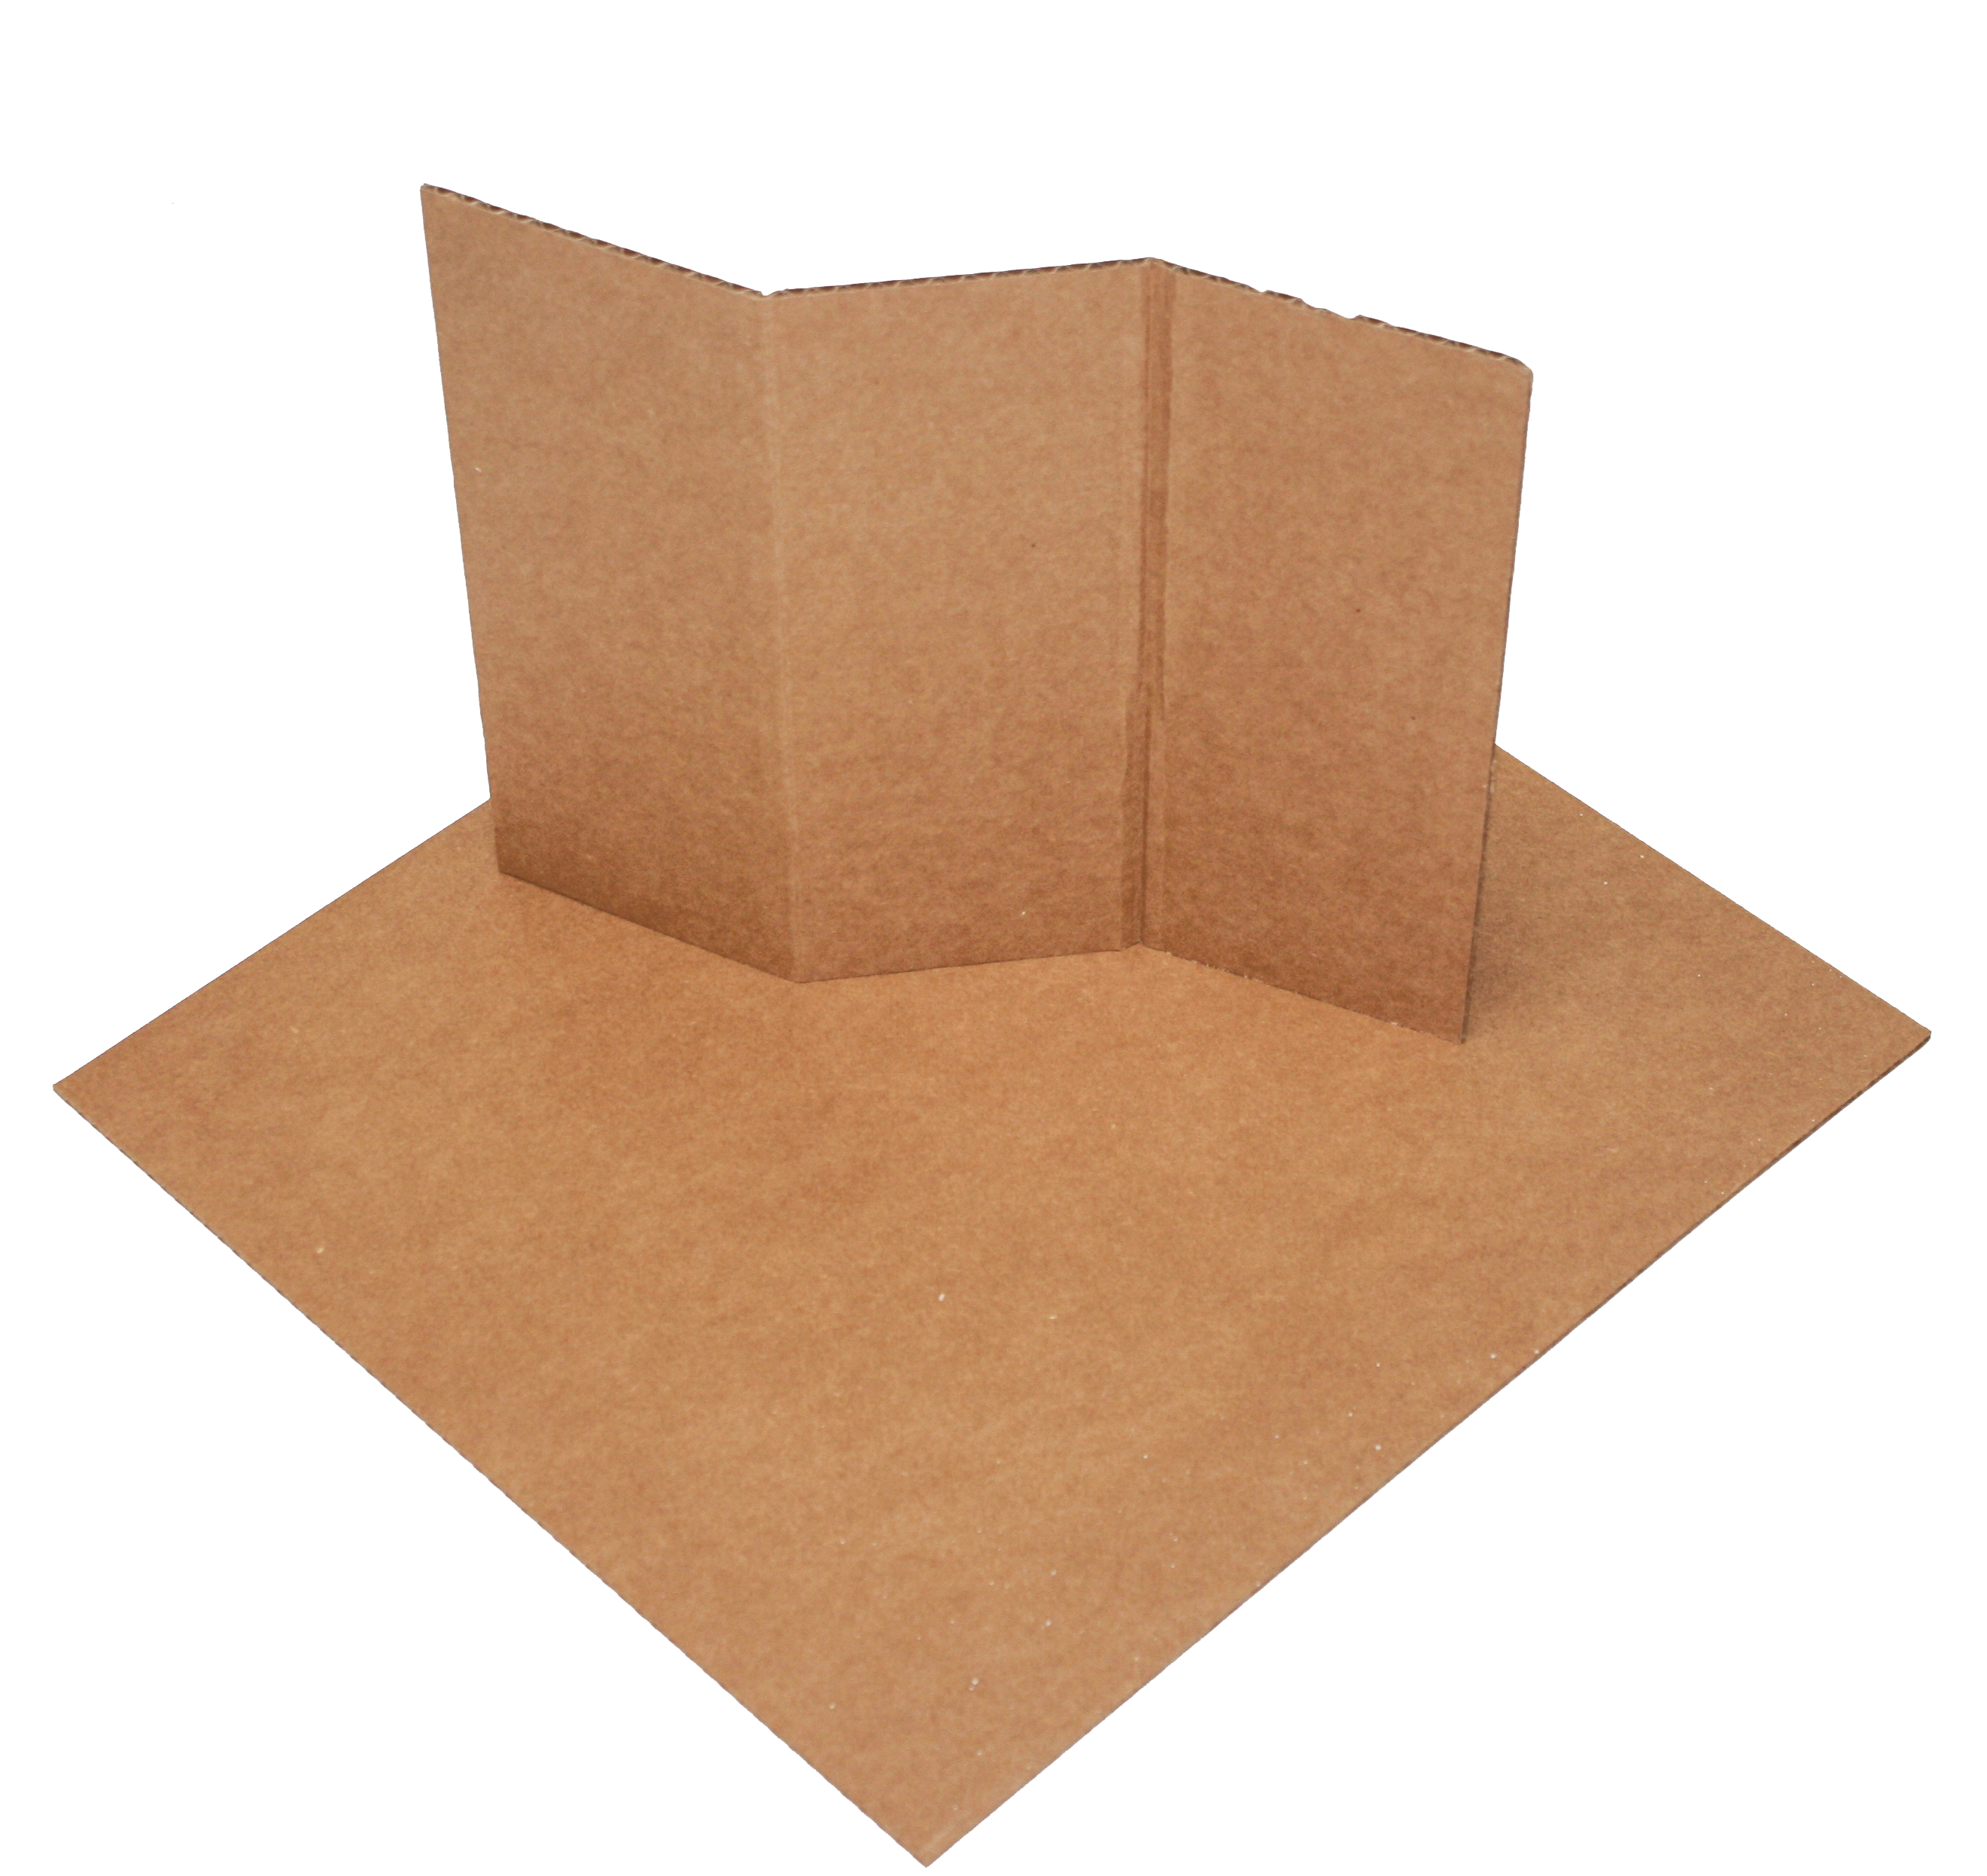 12.5 x 12.5 Corrugated Pad Sold in stacks of 100 – 3D Corrugated